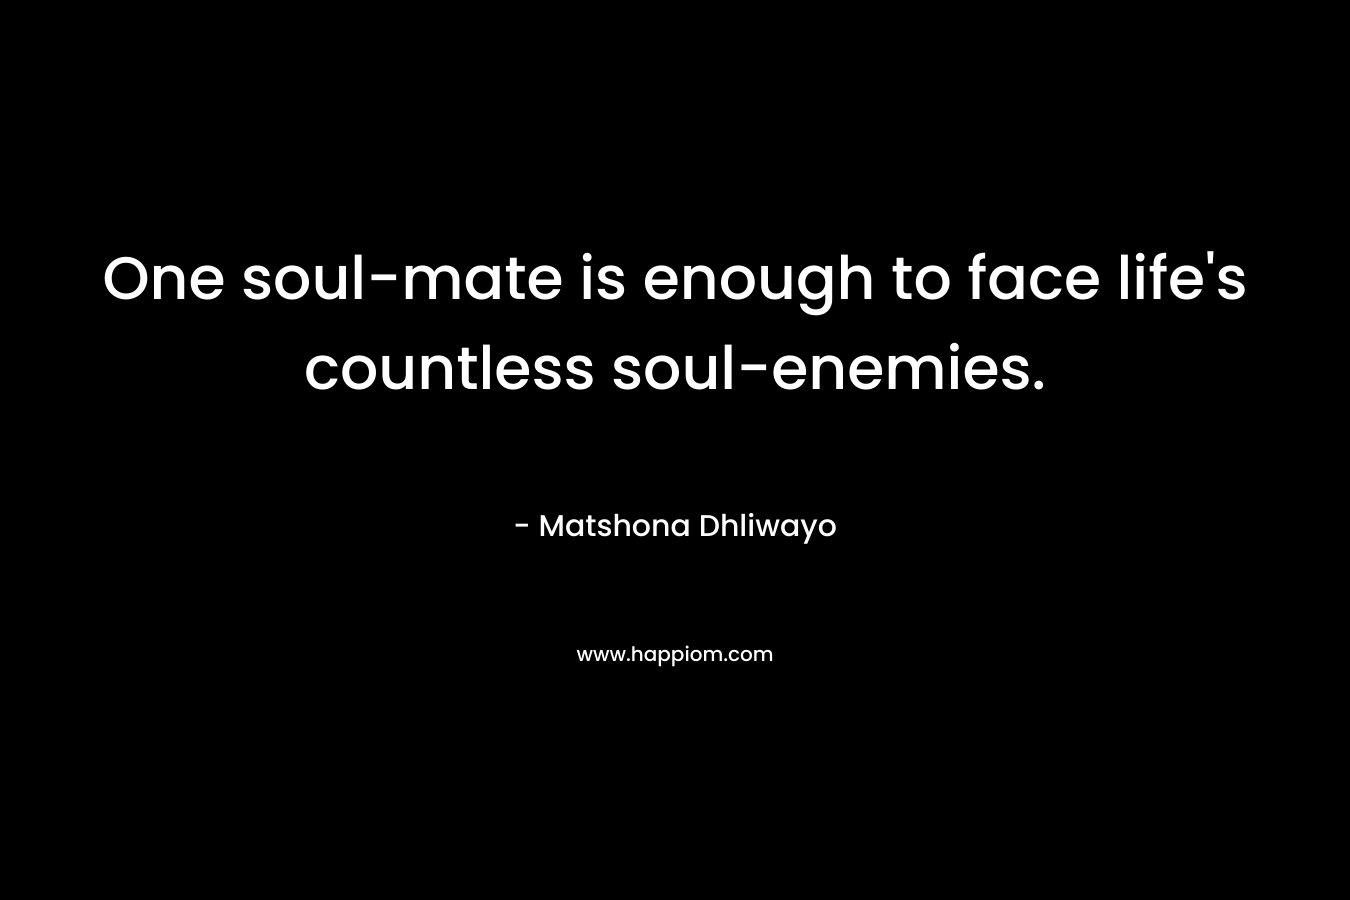 One soul-mate is enough to face life's countless soul-enemies.